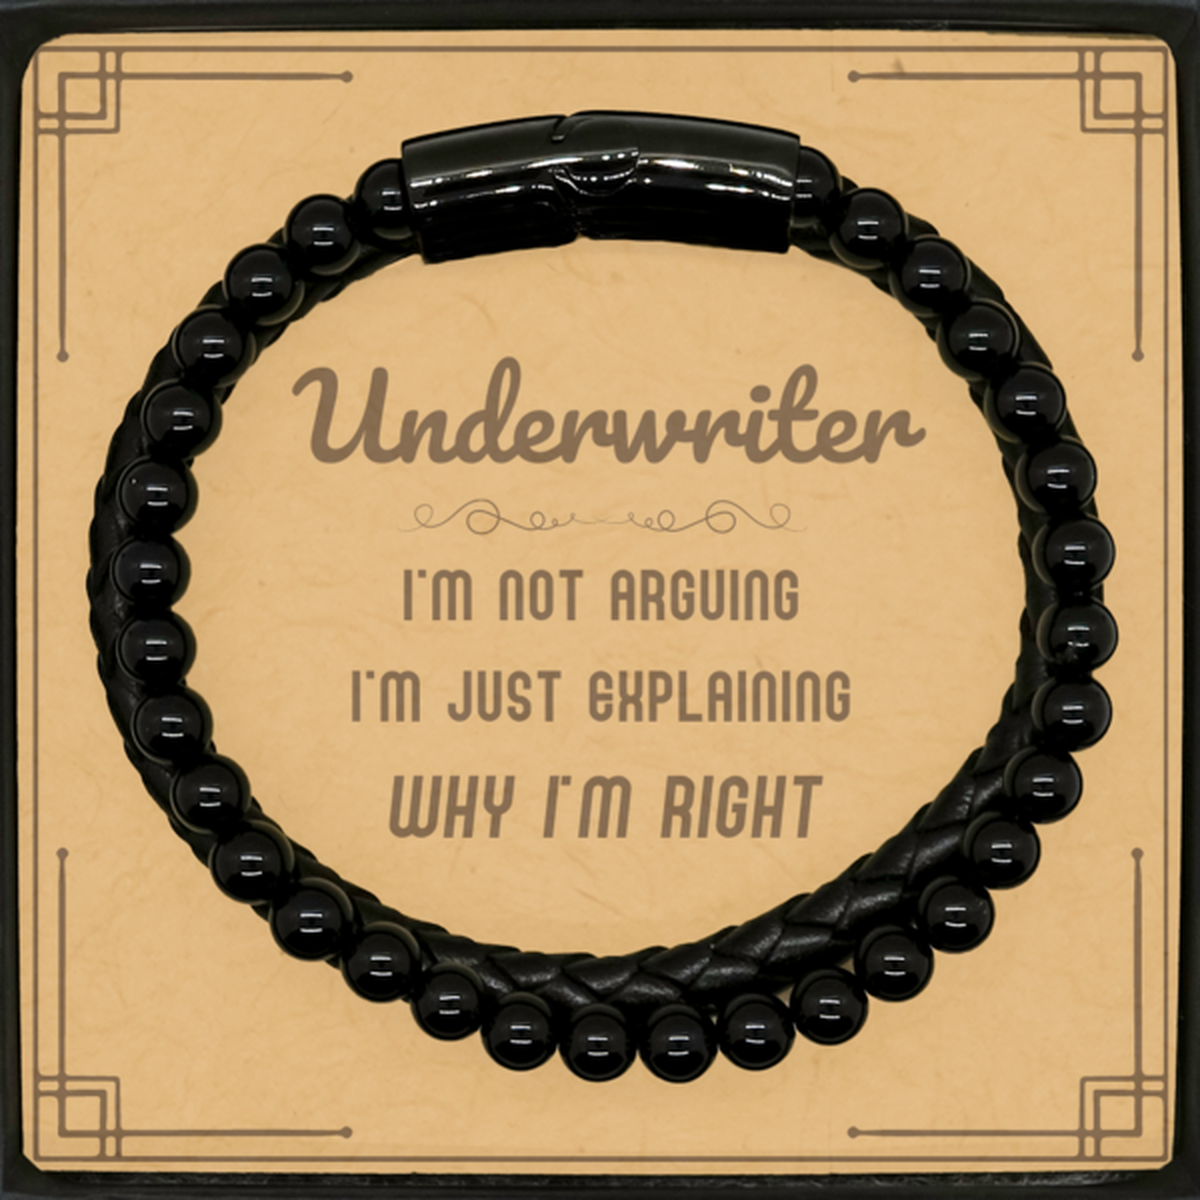 Underwriter I'm not Arguing. I'm Just Explaining Why I'm RIGHT Stone Leather Bracelets, Funny Saying Quote Underwriter Gifts For Underwriter Message Card Graduation Birthday Christmas Gifts for Men Women Coworker